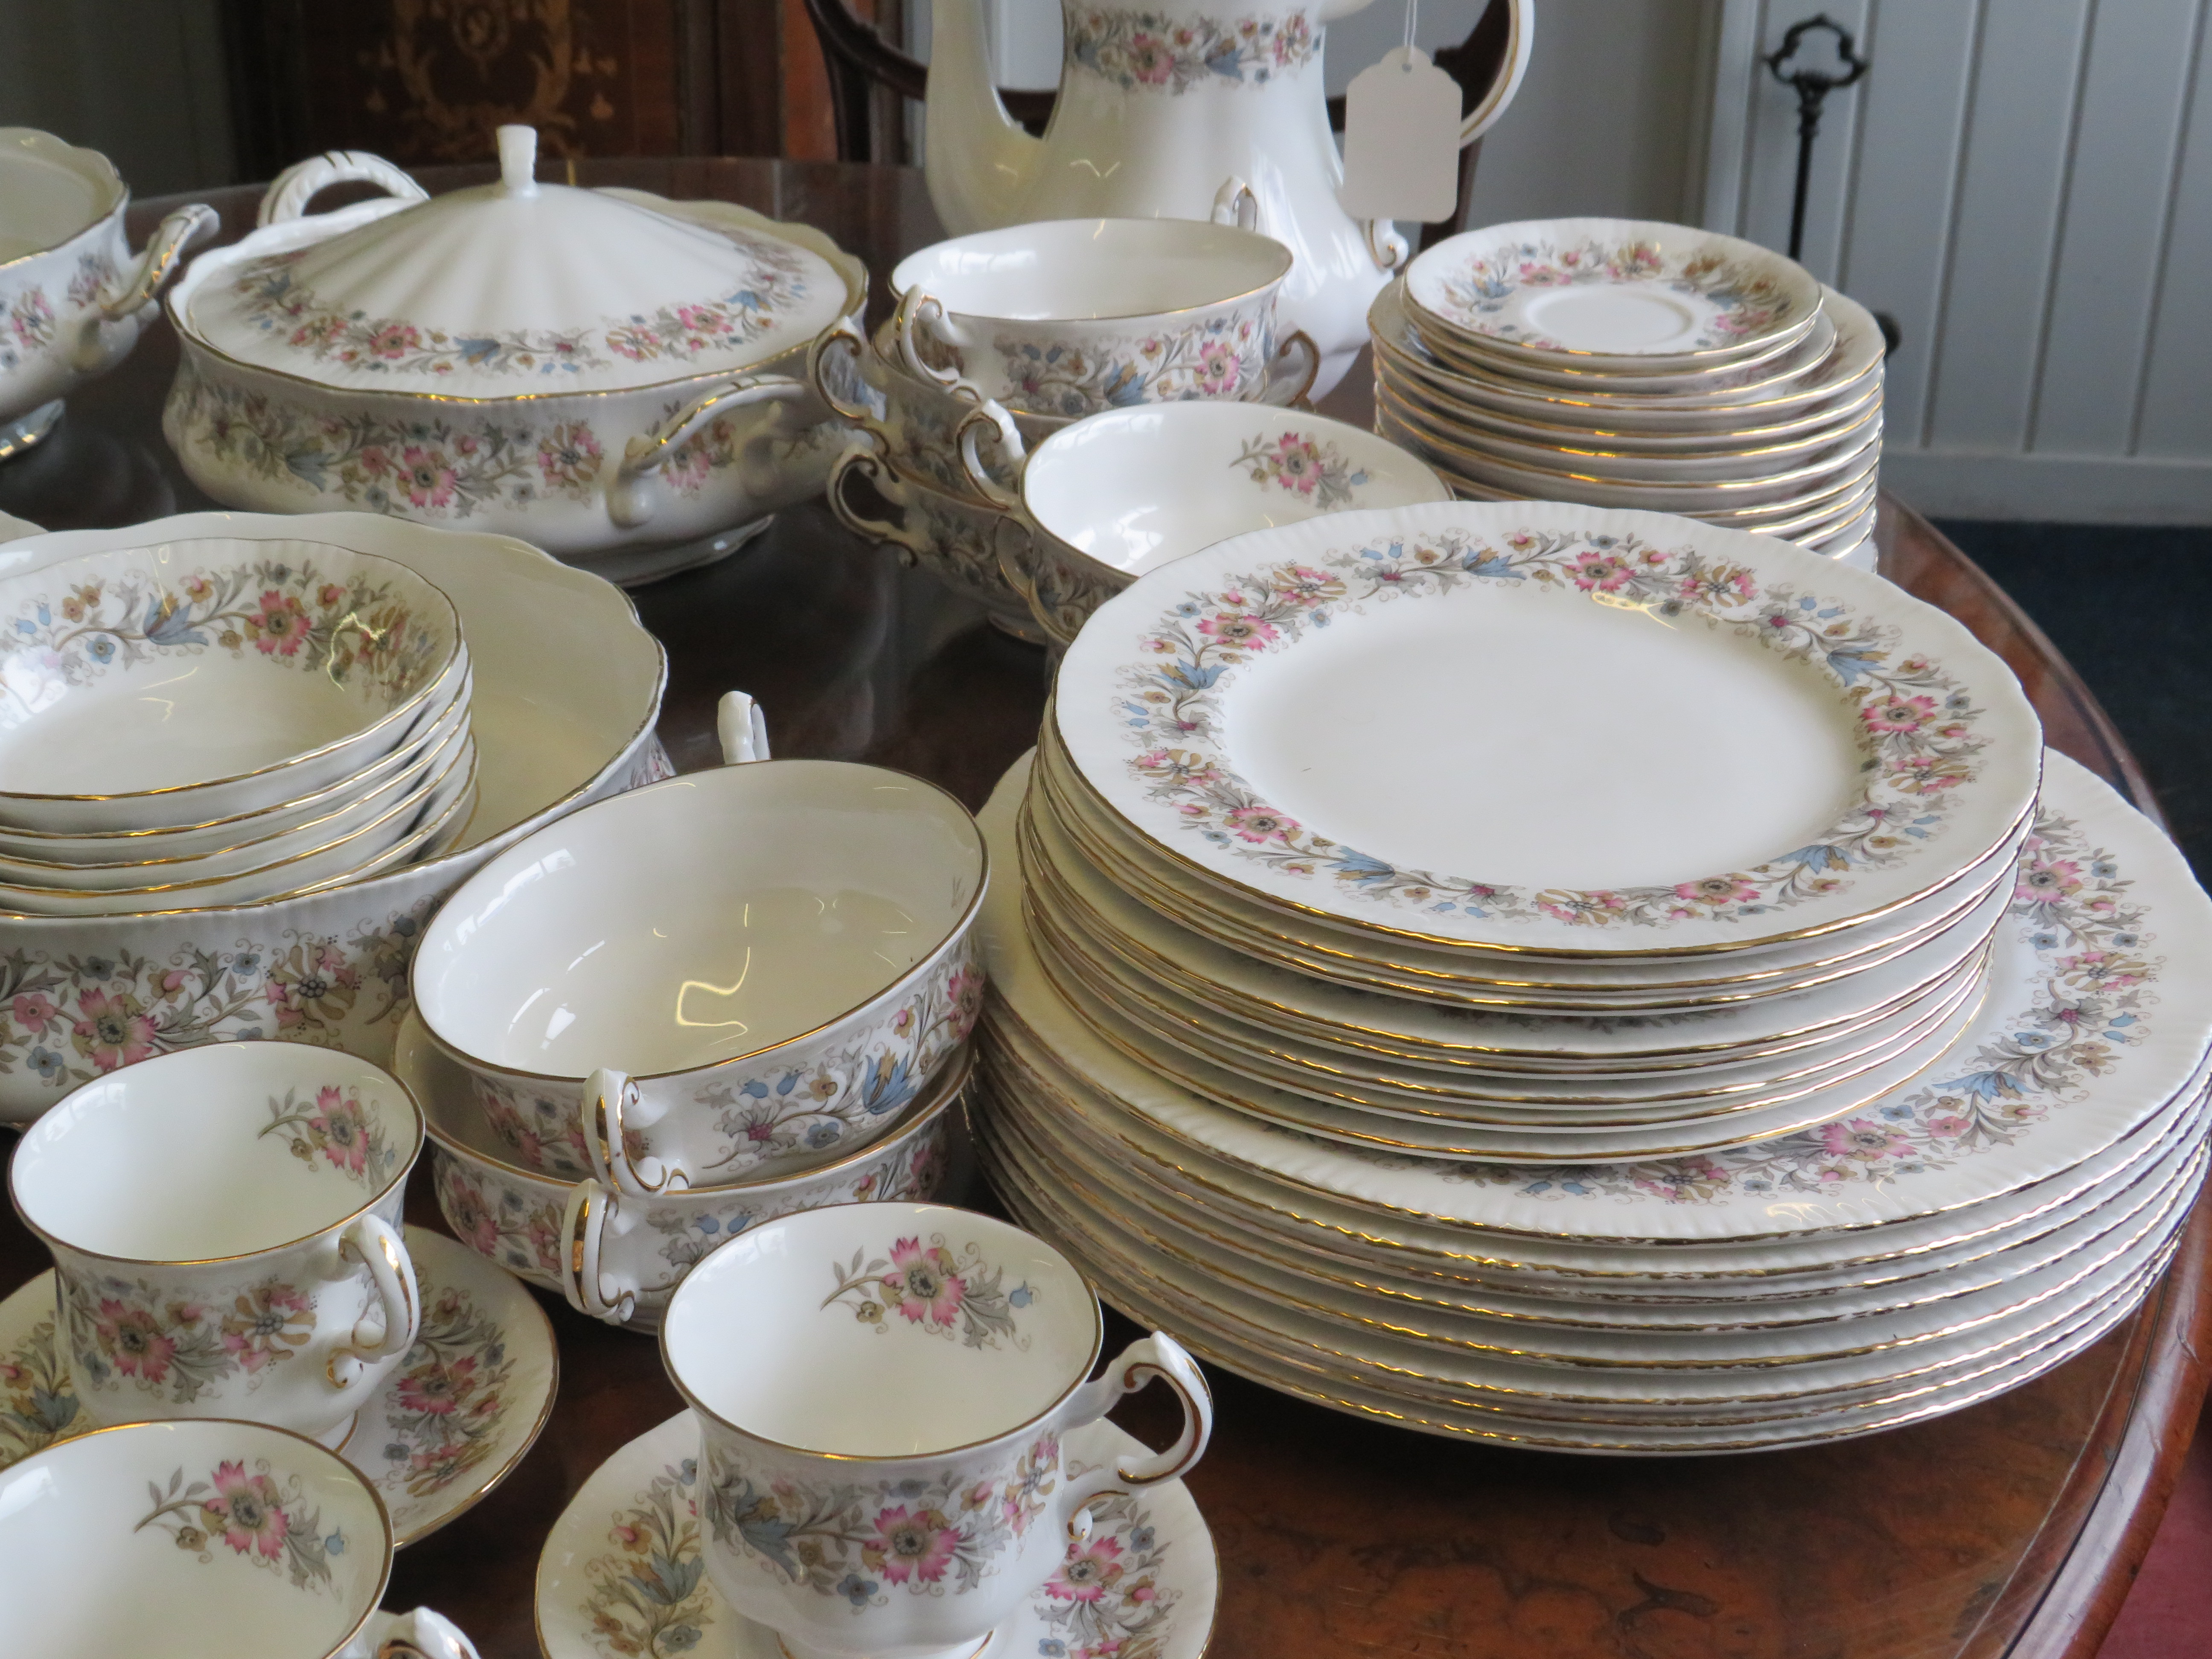 Over 65 pieces of Paragon china dinner / teaset in the Meadowvale pattern. - Image 5 of 5